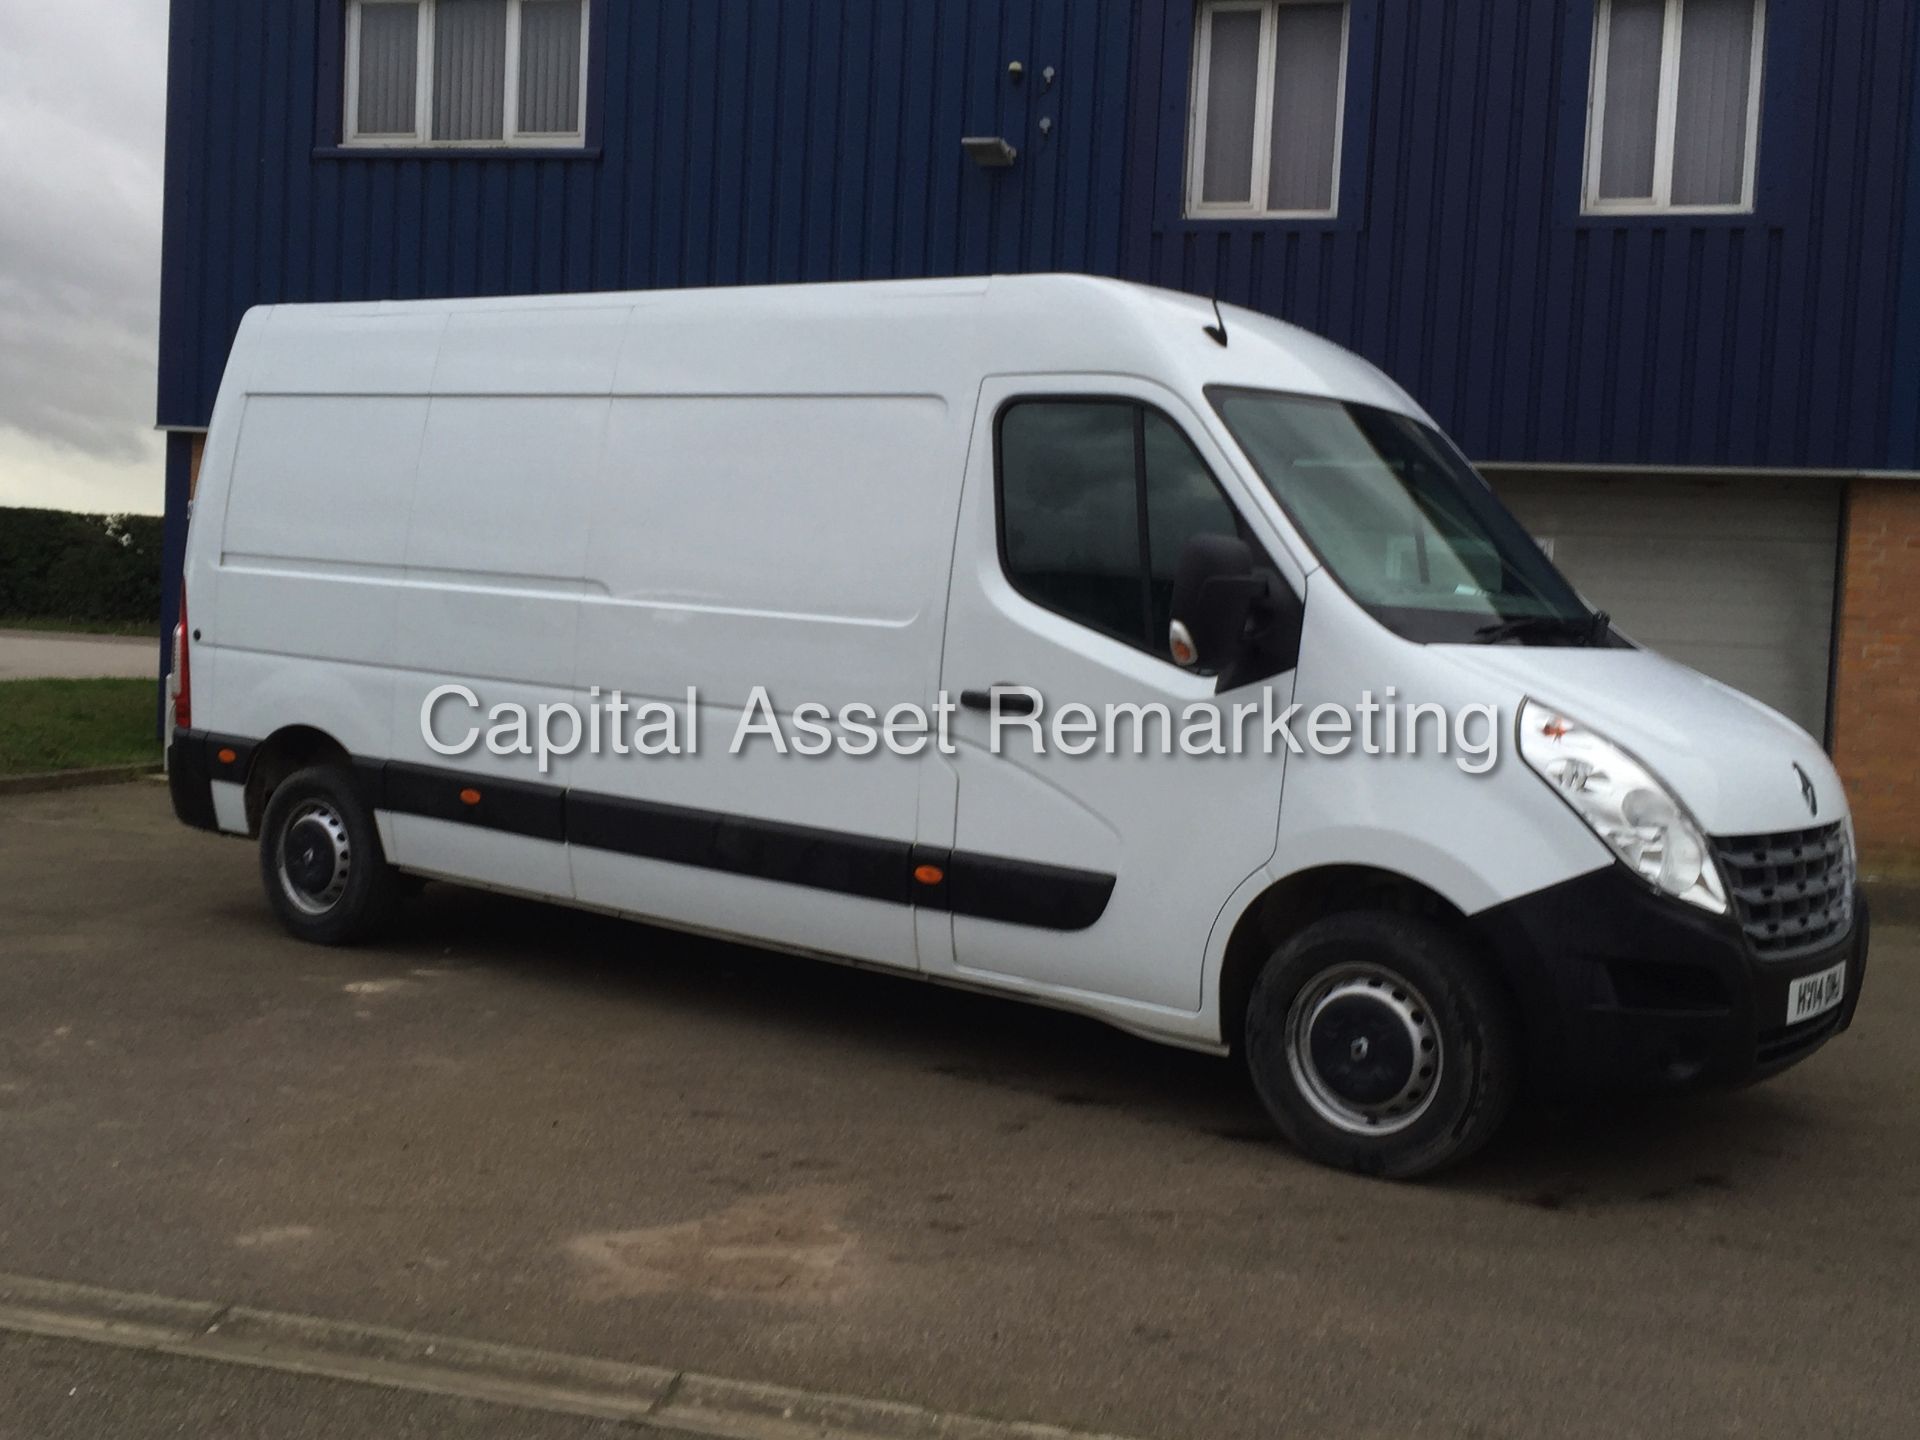 (ON SALE) RENAULT MASTER LM35 'EXTRA' (2014 - 14 REG) 2.3 DCI - 6 SPEED - AIR CON  (1 COMPANY OWNER) - Image 8 of 16